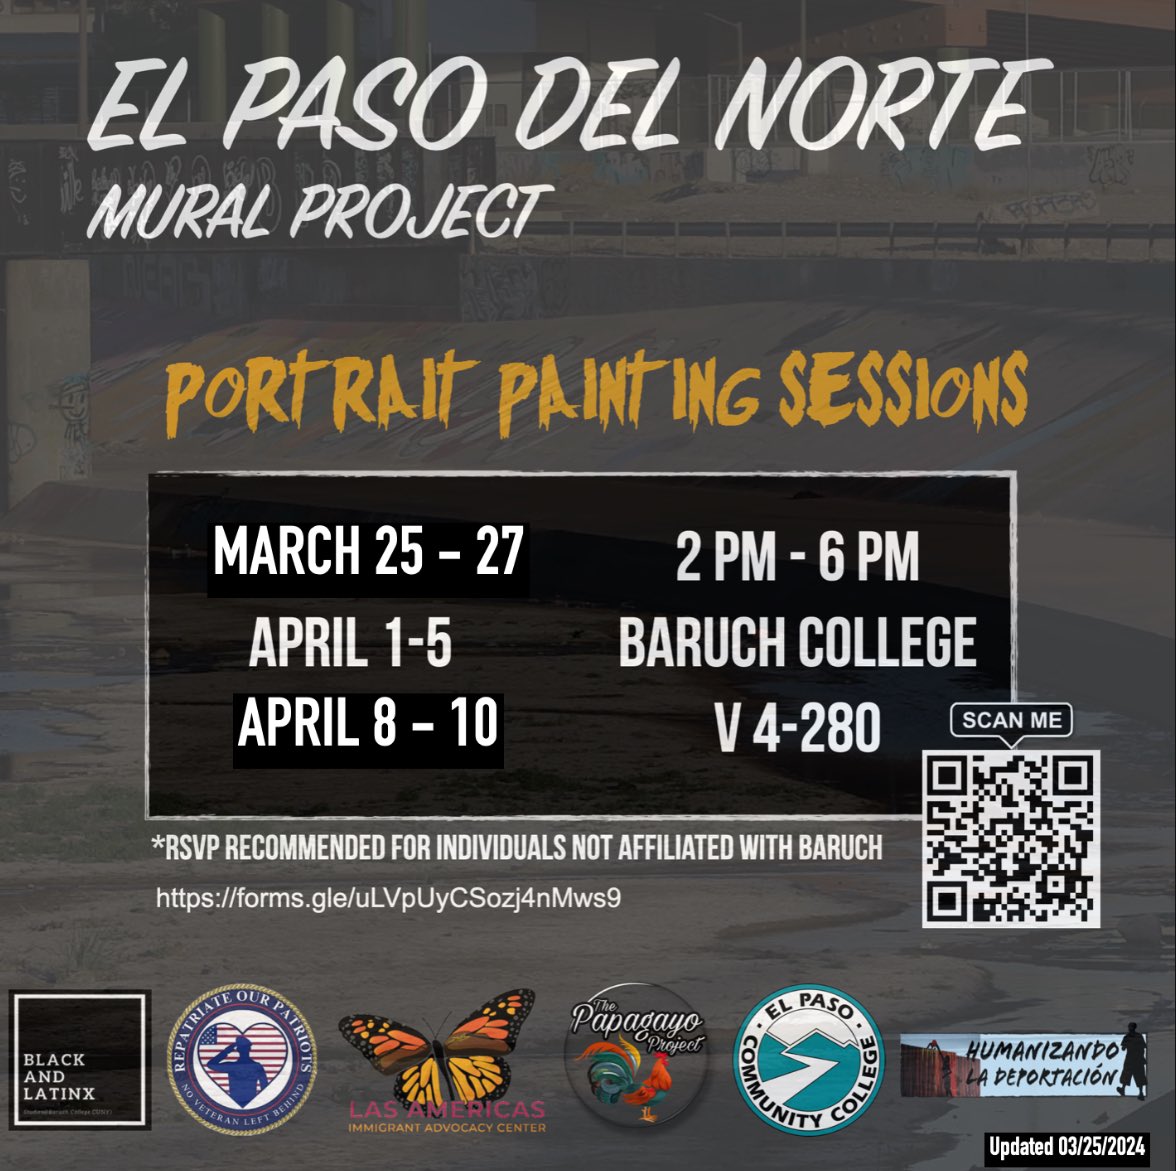 Our painting sessions for the El Paso del Norte continue this Monday - Friday from 2-6pm at Baruch College. This Wednesday we will be joined by Jean Dorsainvil, storyteller for the mural project. RSVP needed for folks not affiliated with CUNY. docs.google.com/forms/d/e/1FAI…